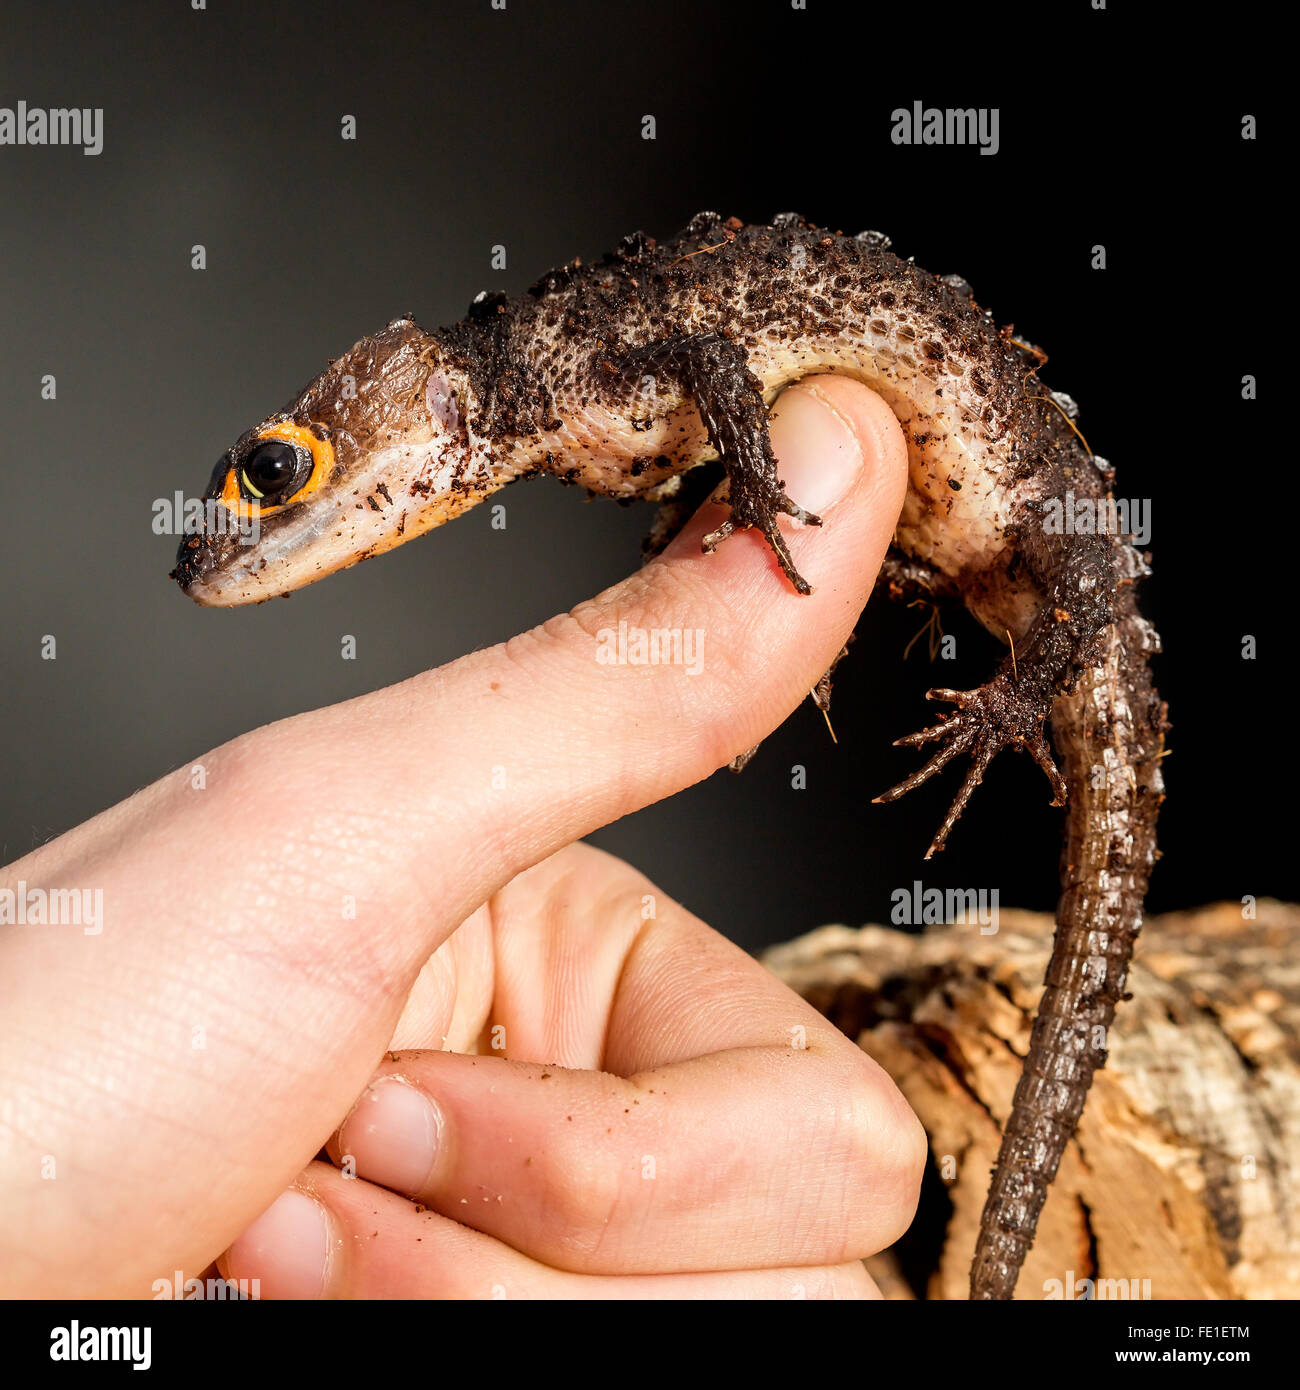 Red eyed crocodile skink, Tribolonotus gracilis, climbing the finger of a man Stock Photo